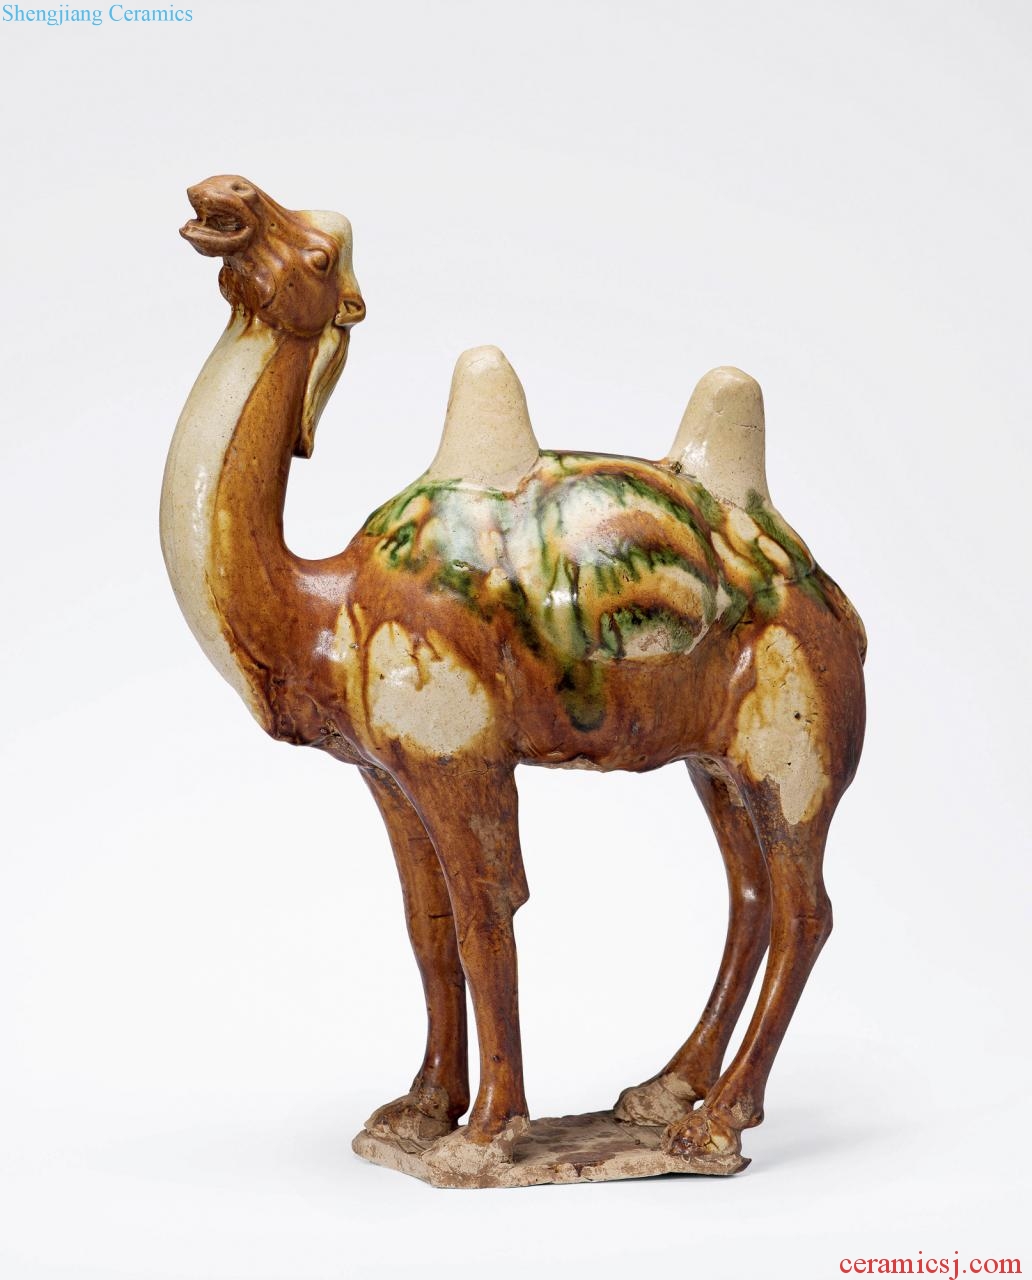 Tang dynasty (618-907), three-color camels